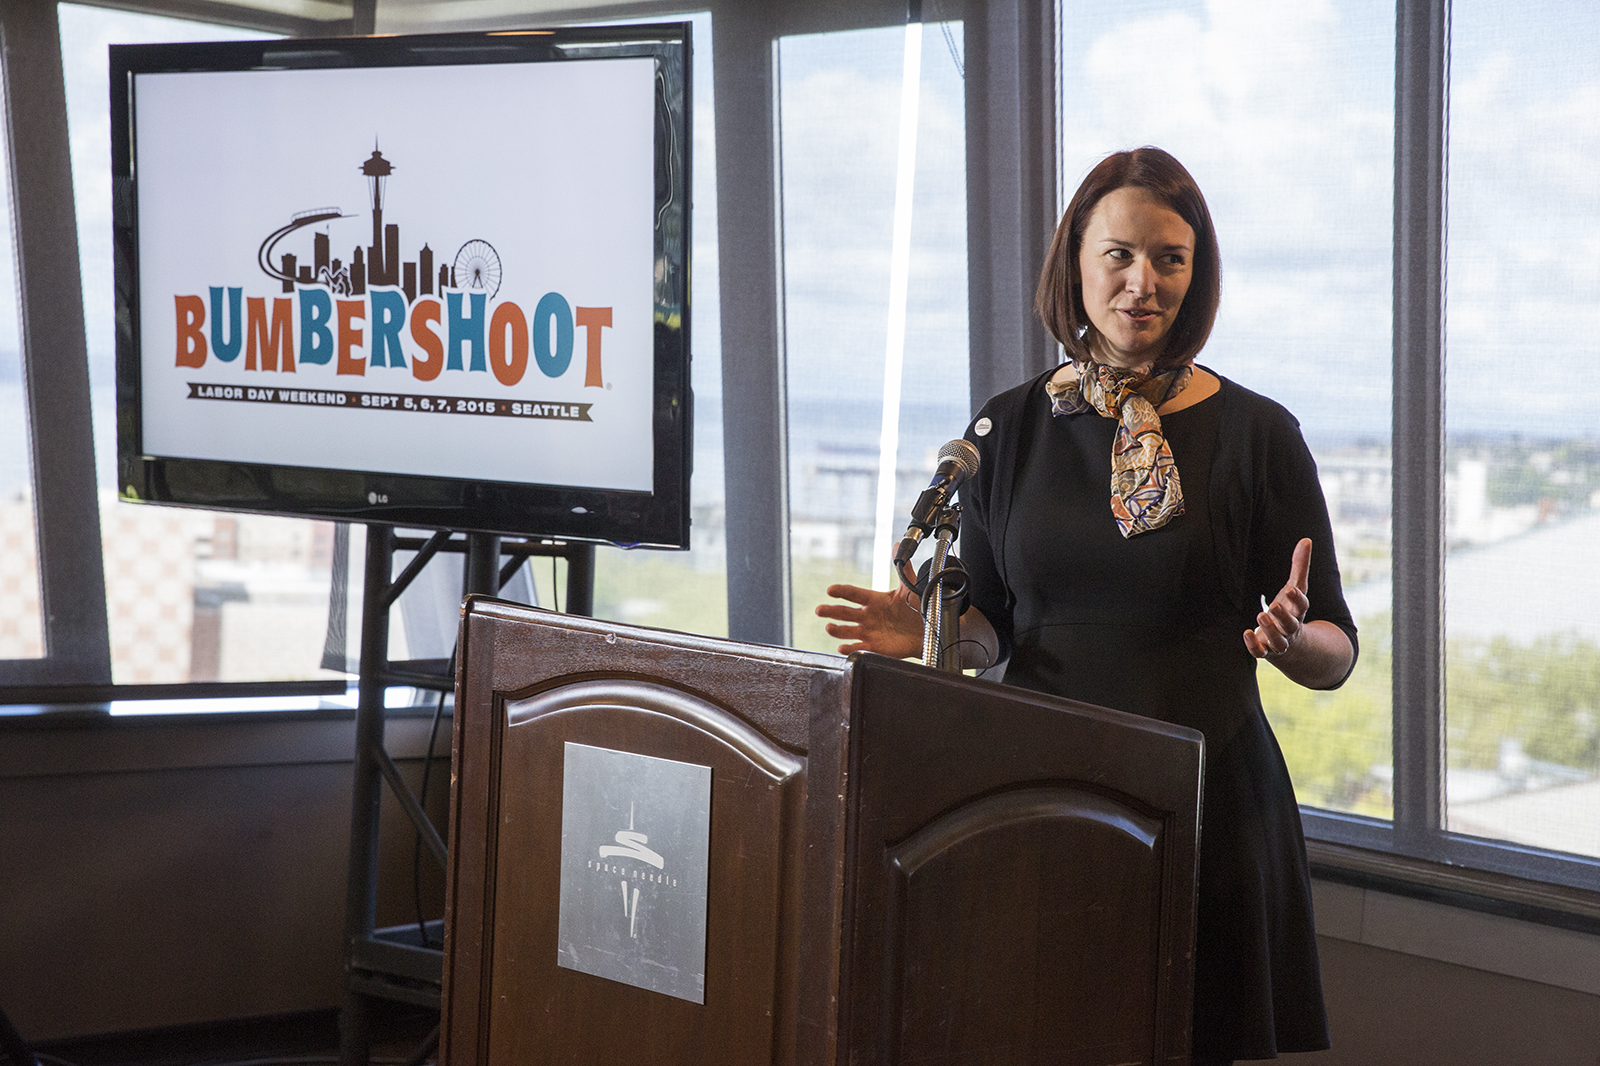 OneReel Director, Heather Smith, Bumbershoot 2015 Announcement Photo by Alex Crick